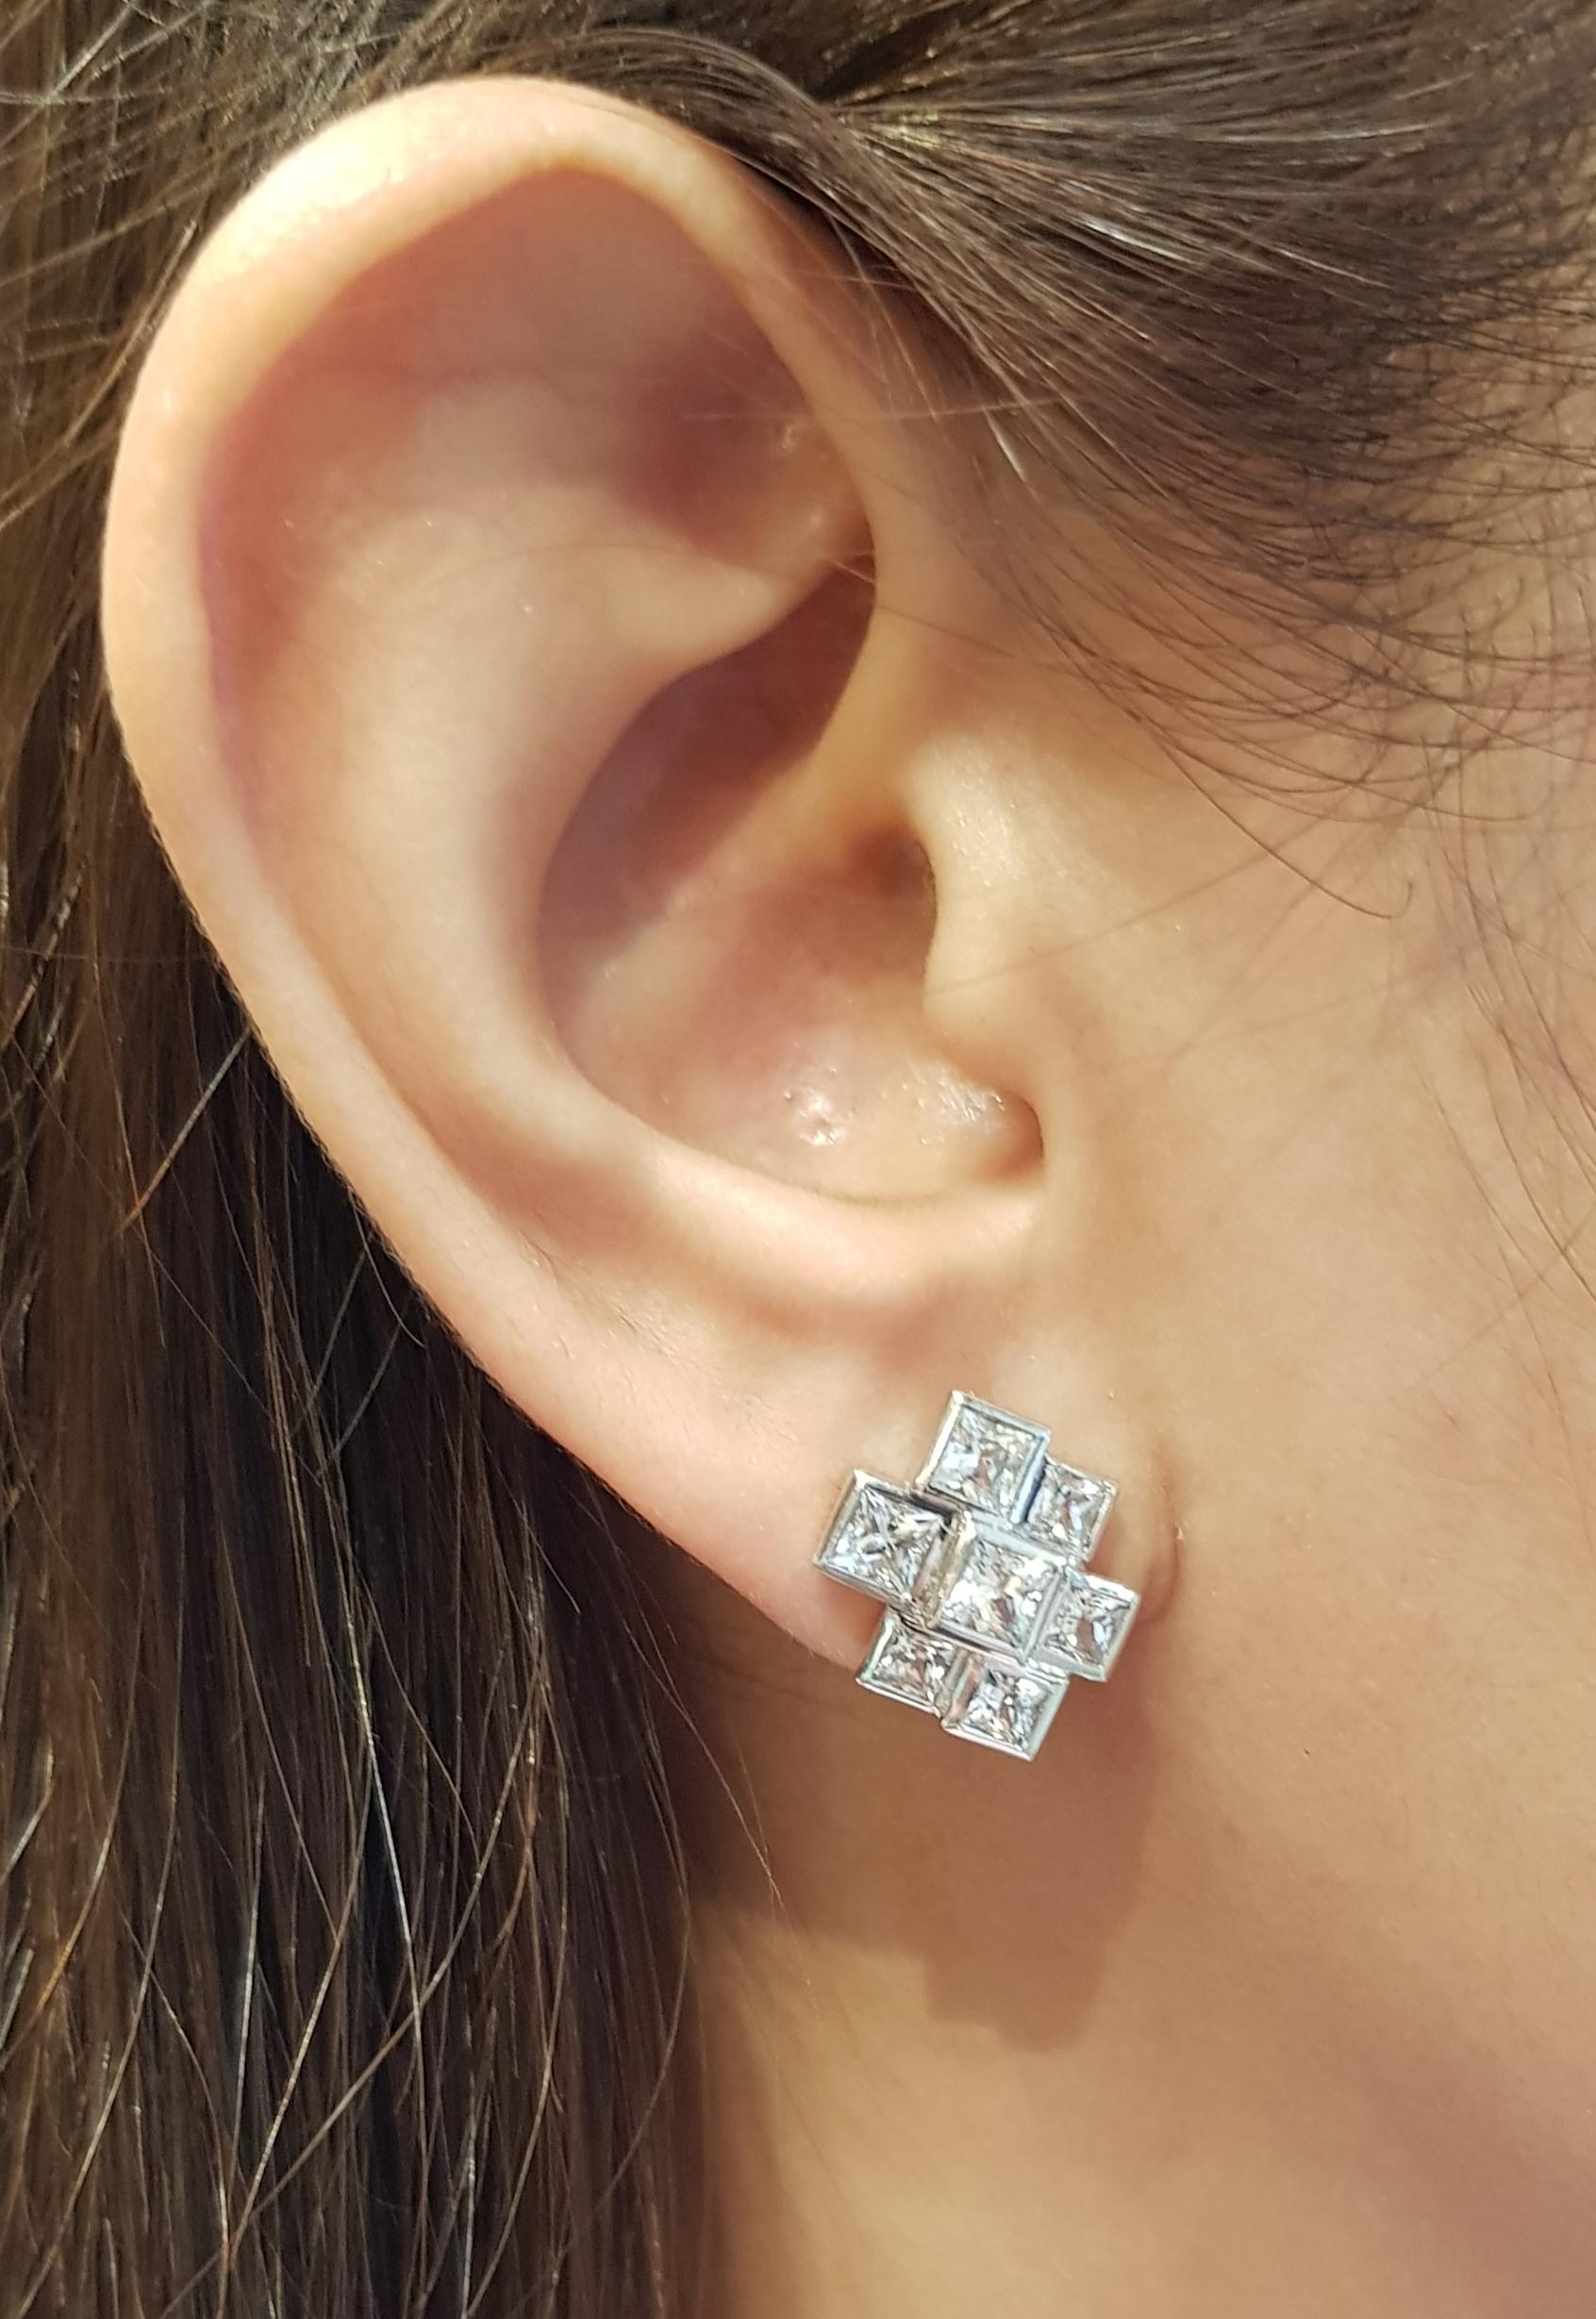 White Sapphire 2.96 carats Earrings set in 18 Karat White Gold Settings

Width:  1.3 cm 
Length: 1.6 cm
Total Weight: 9.29 grams

